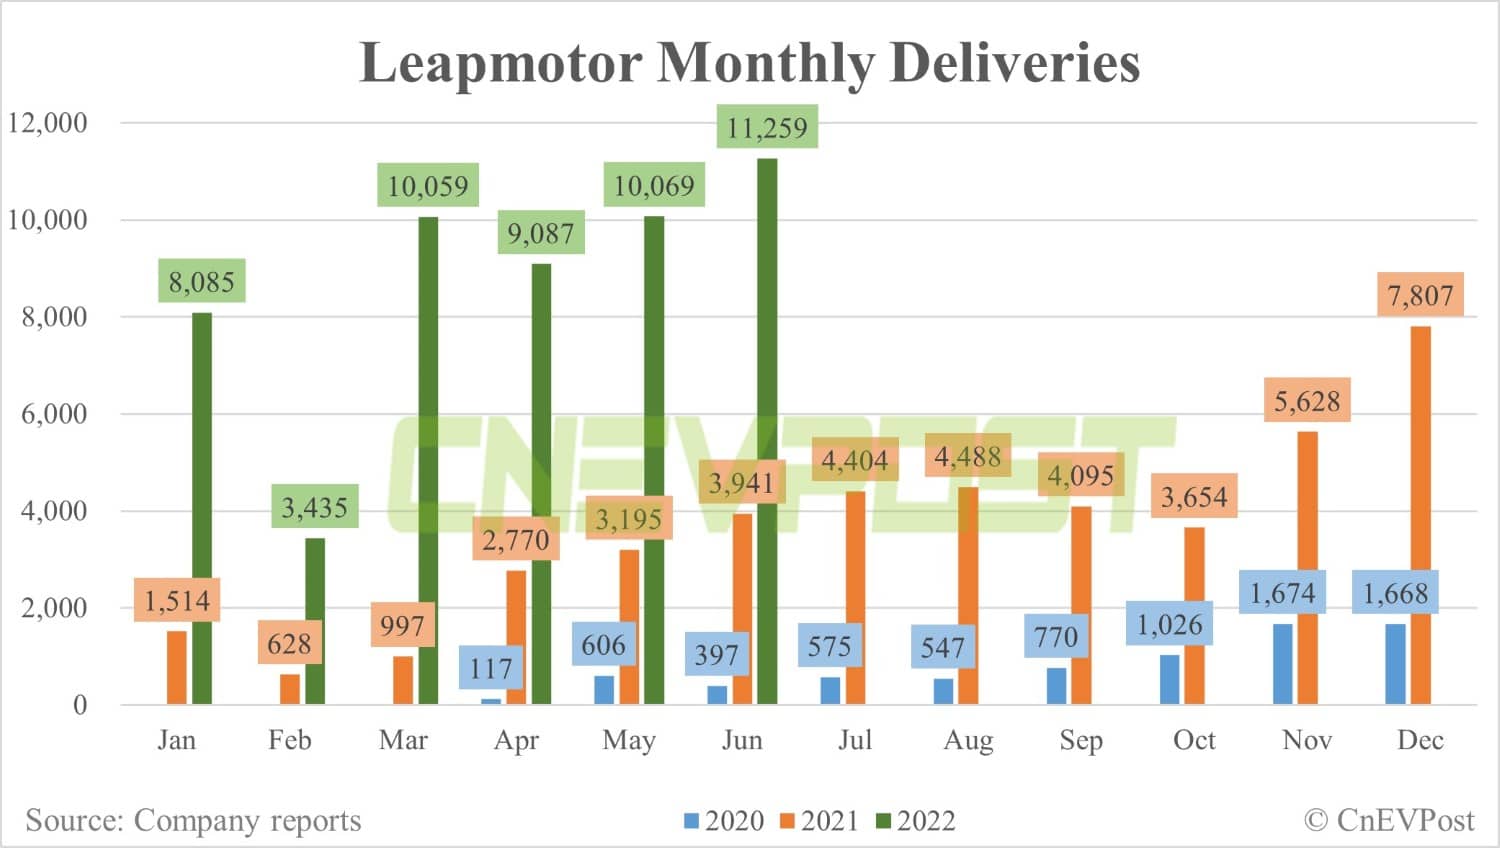 Leapmotor delivers record 11,259 vehicles in June, up 11.8% from May-CnEVPost